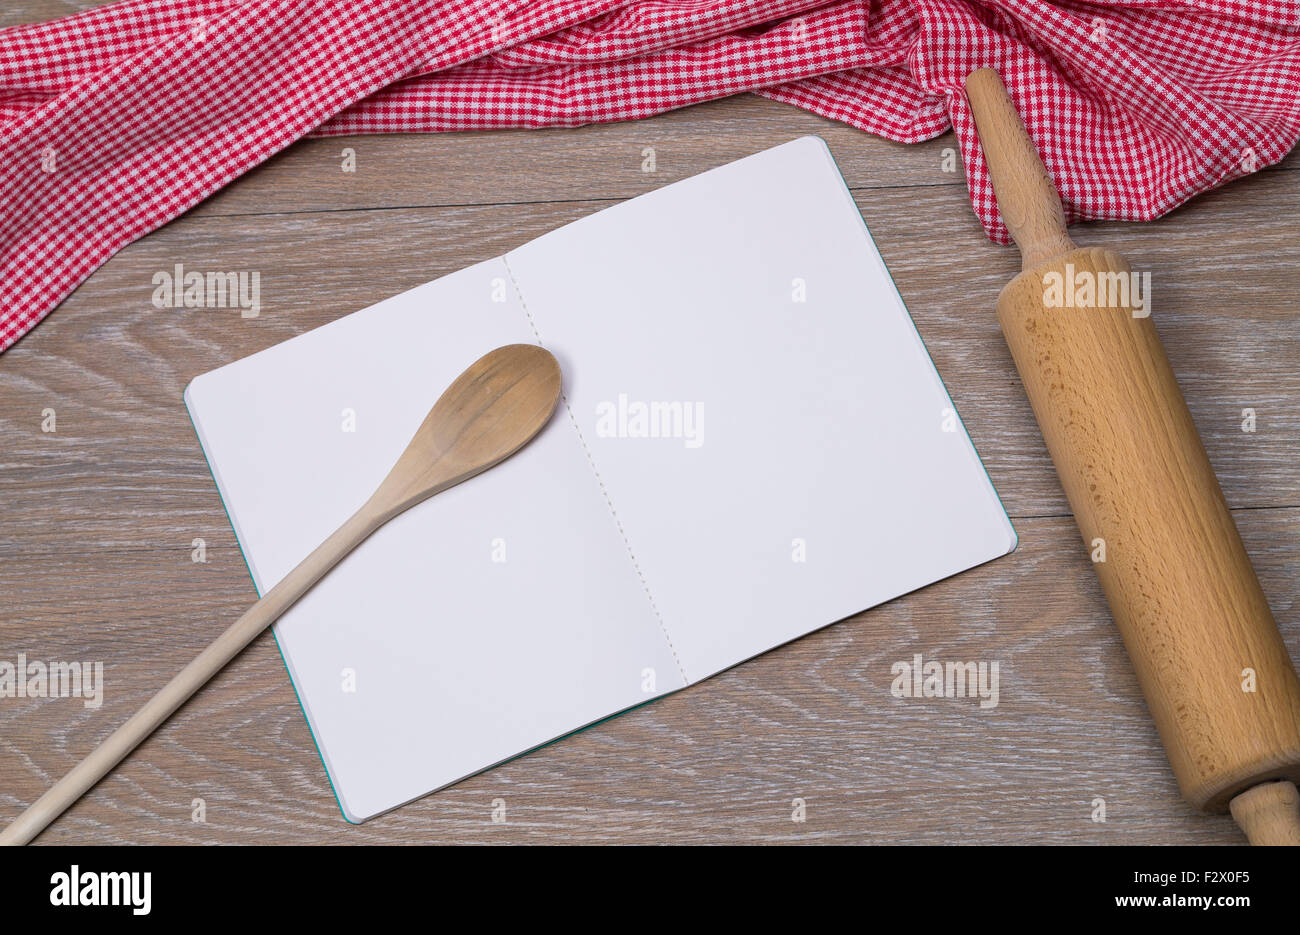 Image shows an open booklet with pen and rolling pin on a table Stock Photo